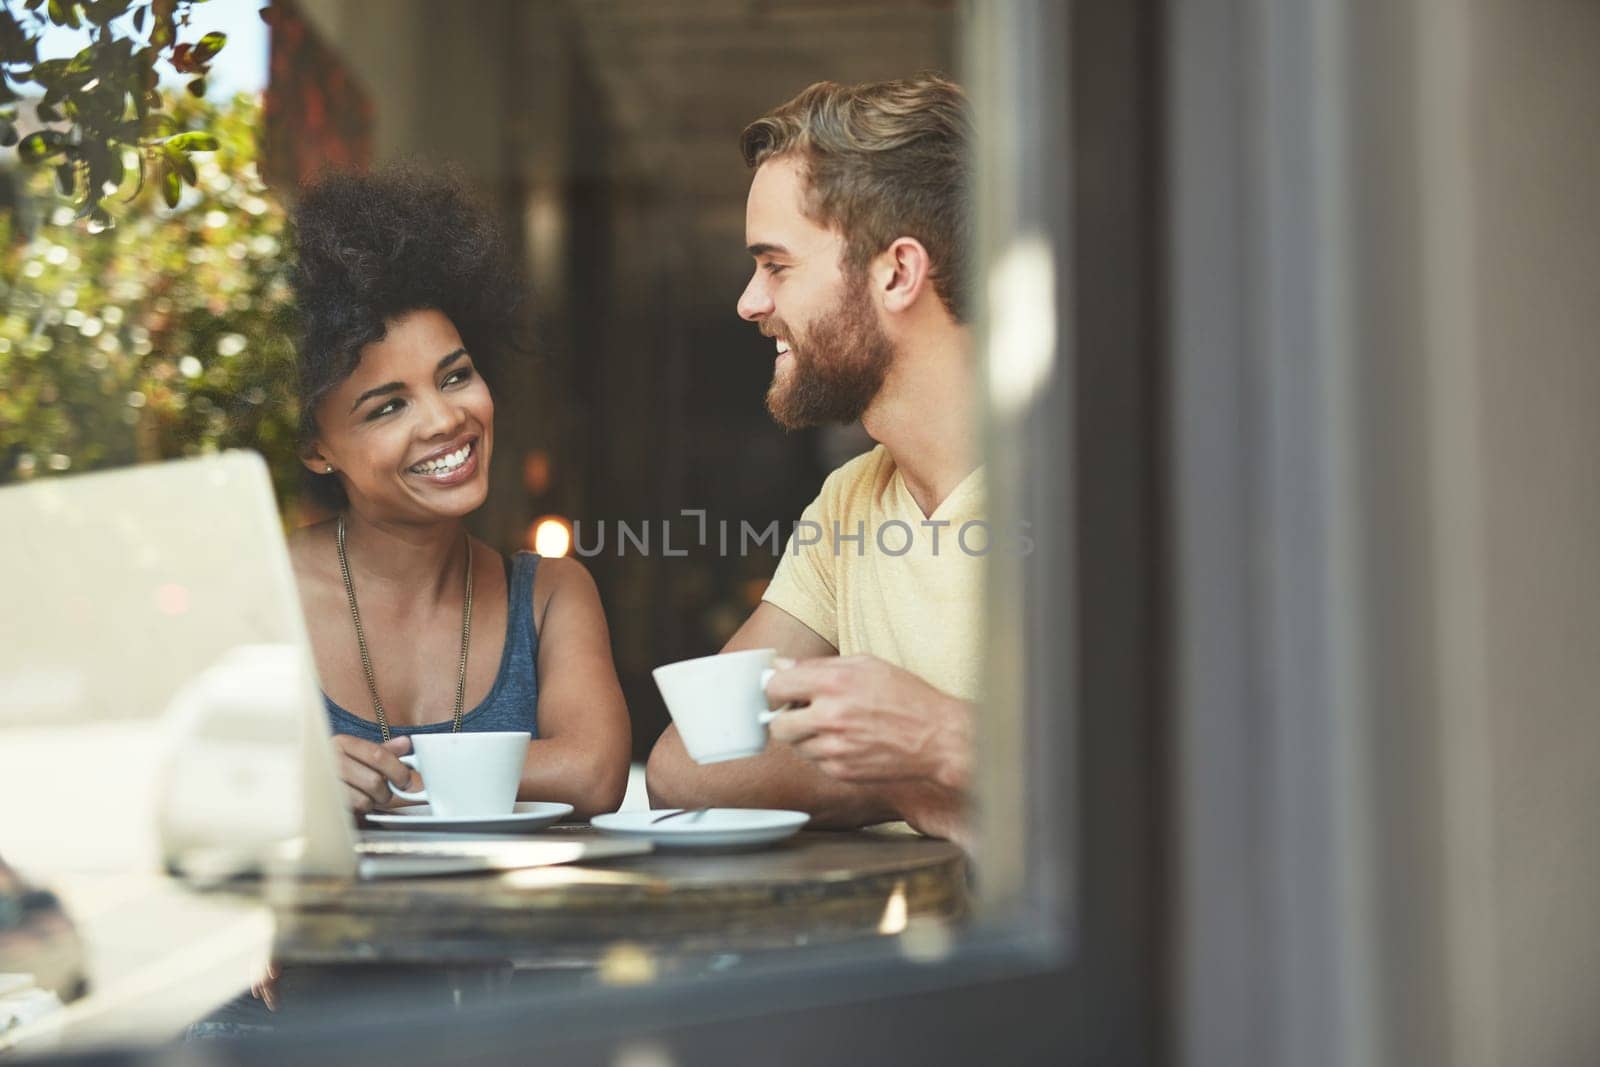 Cafe window, tea and happy people, couple of friends or customer talking, speaking and enjoy romantic date. Coffee shop conversation, communication and diversity man and woman chatting in restaurant.